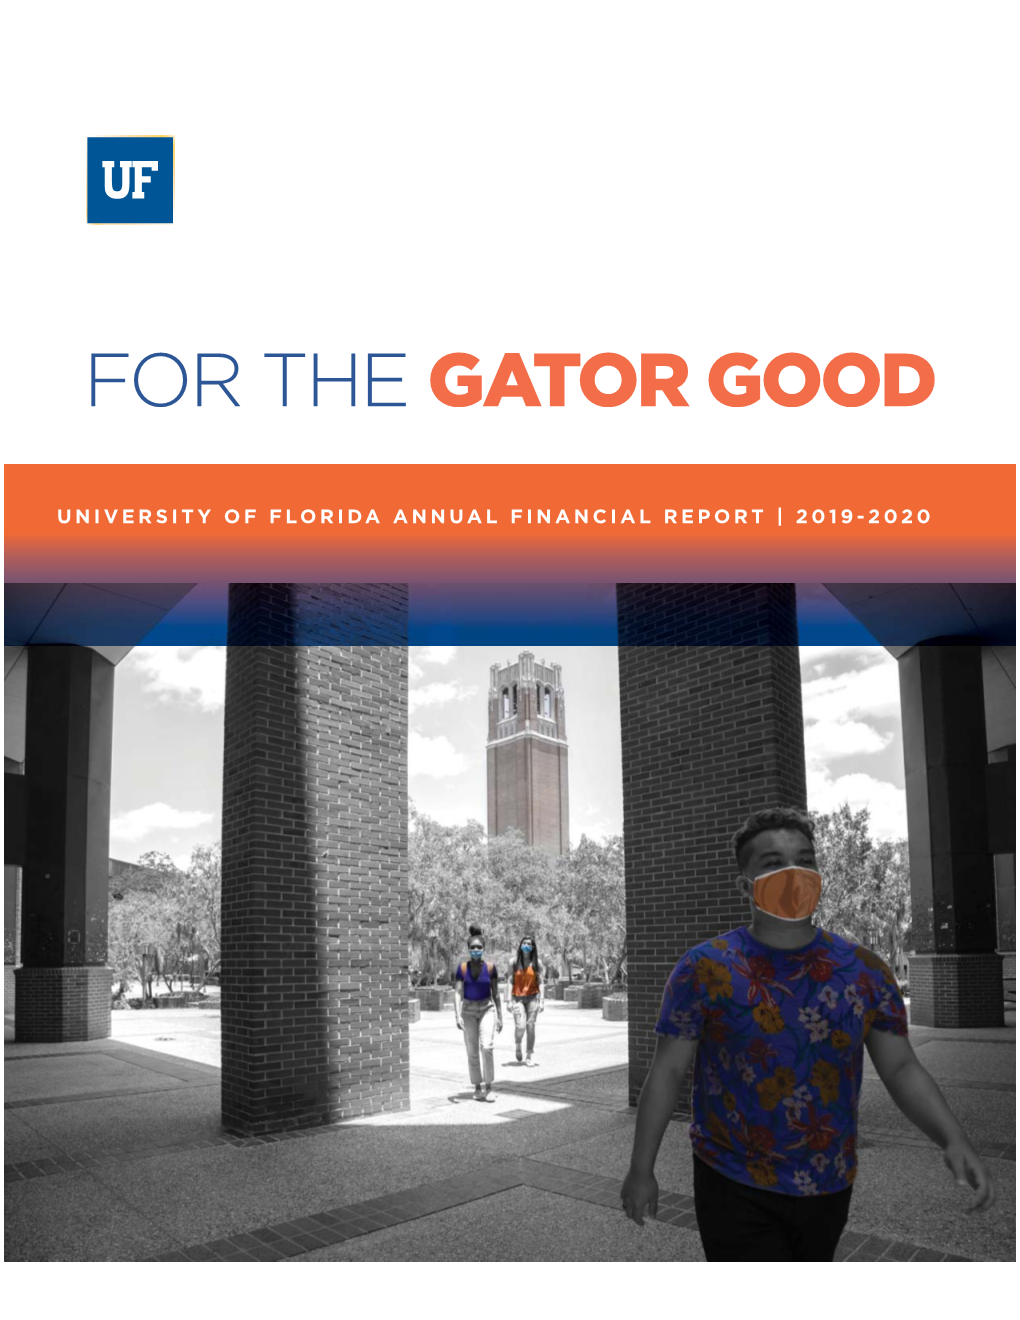 For the Gator Good